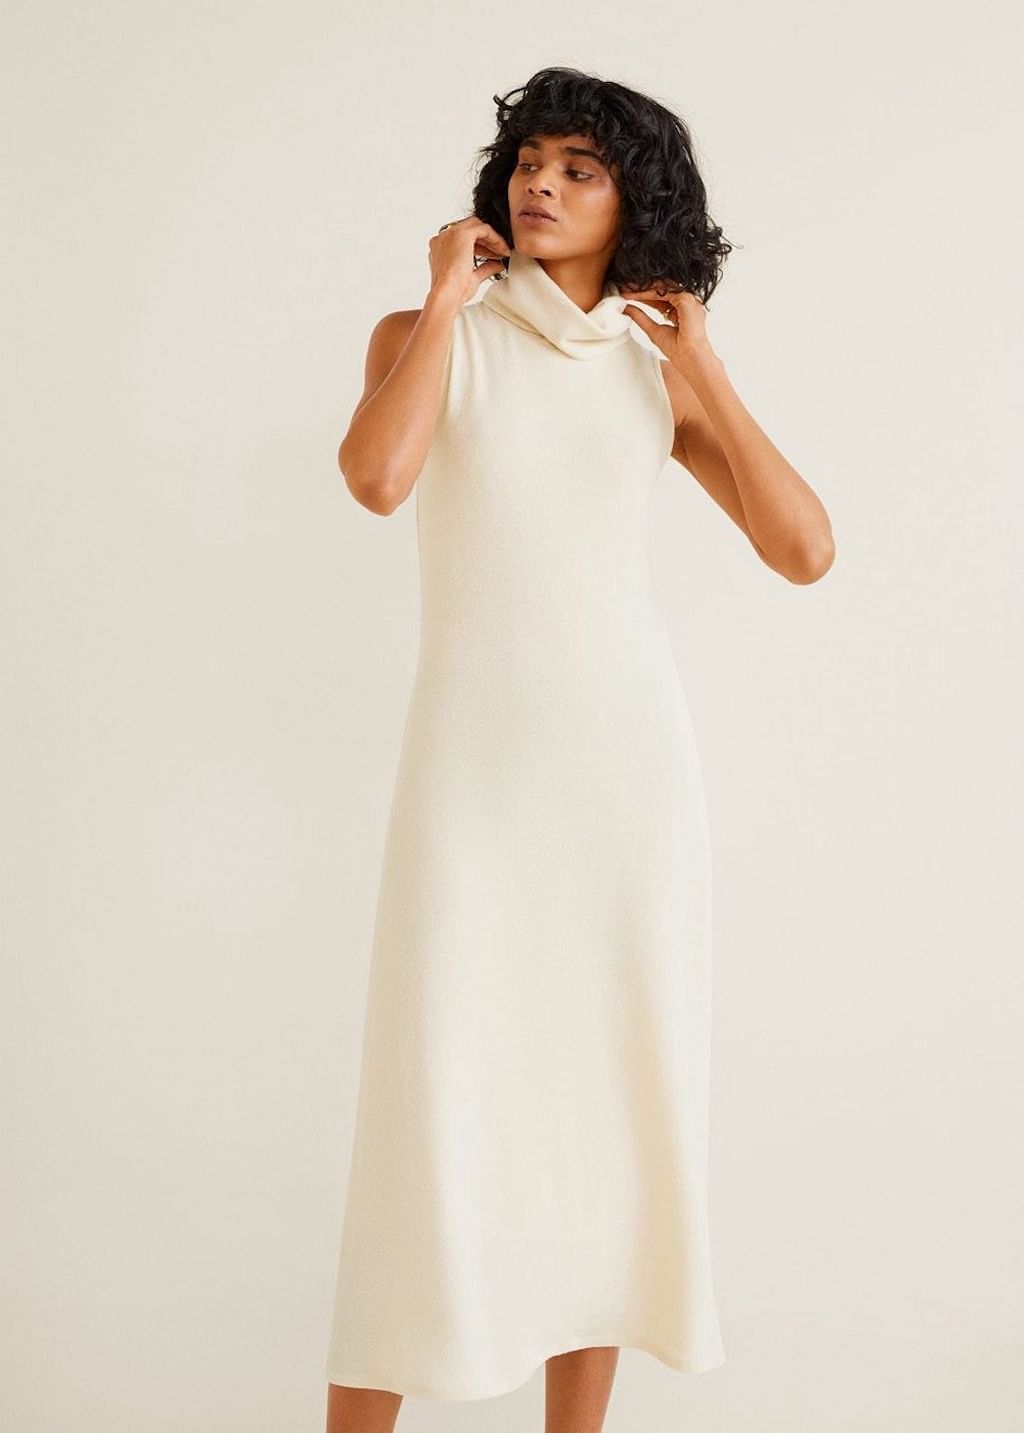 Wanted: neckline recommendations for SG that aren't “high